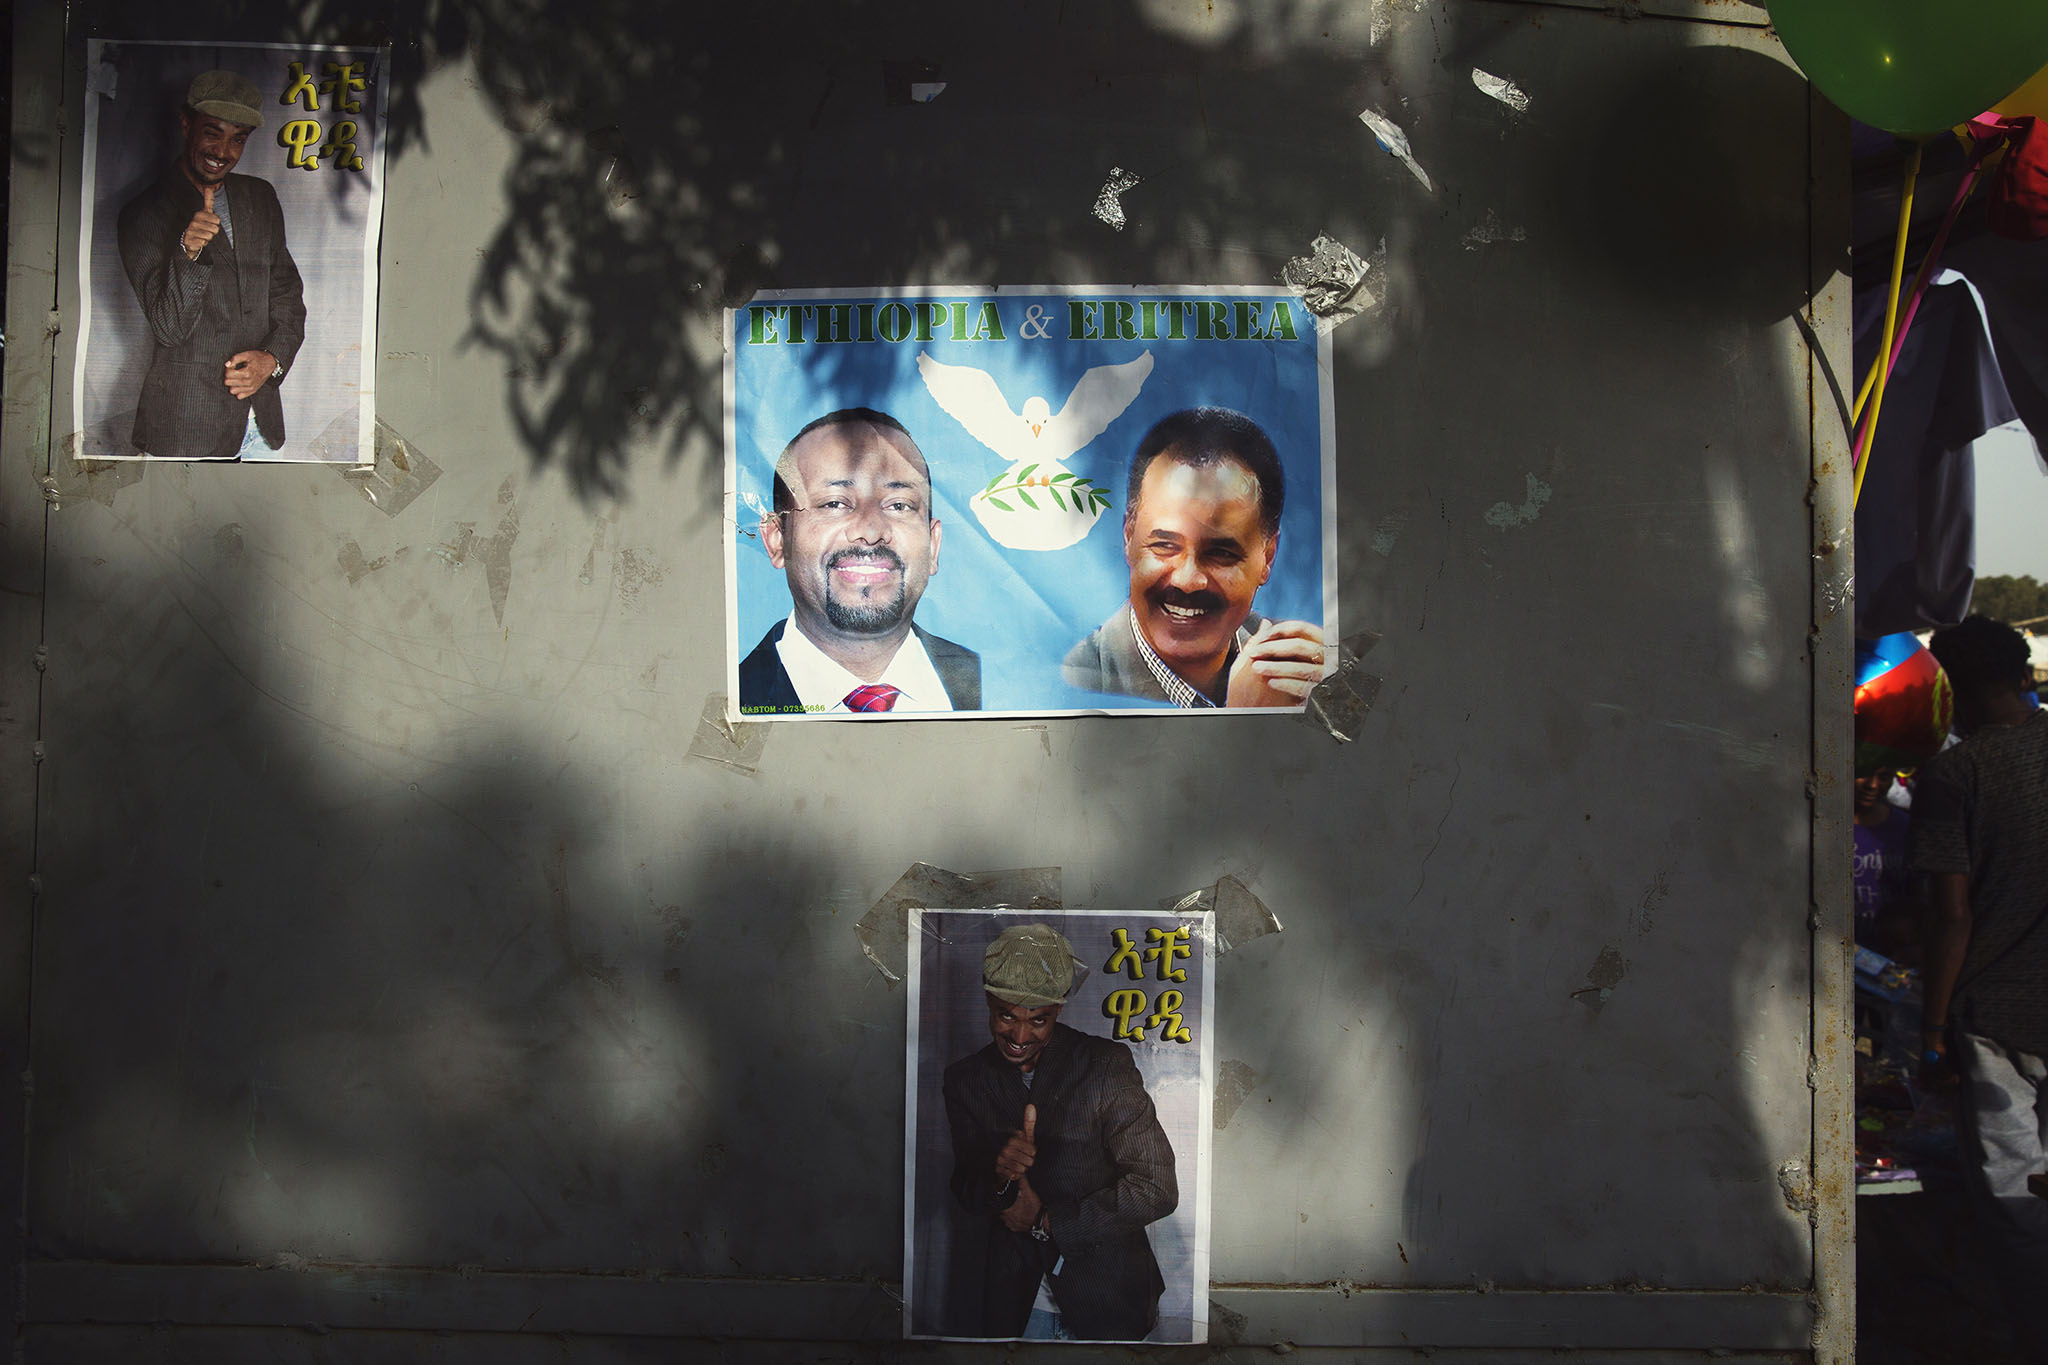 A poster of Prime Minister Abiy Ahmed of Ethiopia, left, and President Isaias Afwerki of Eritrea is displayed during a festival in Asmara, Eritrea, Sept. 7, 2018. (Malin Fezehai/The New York Times)